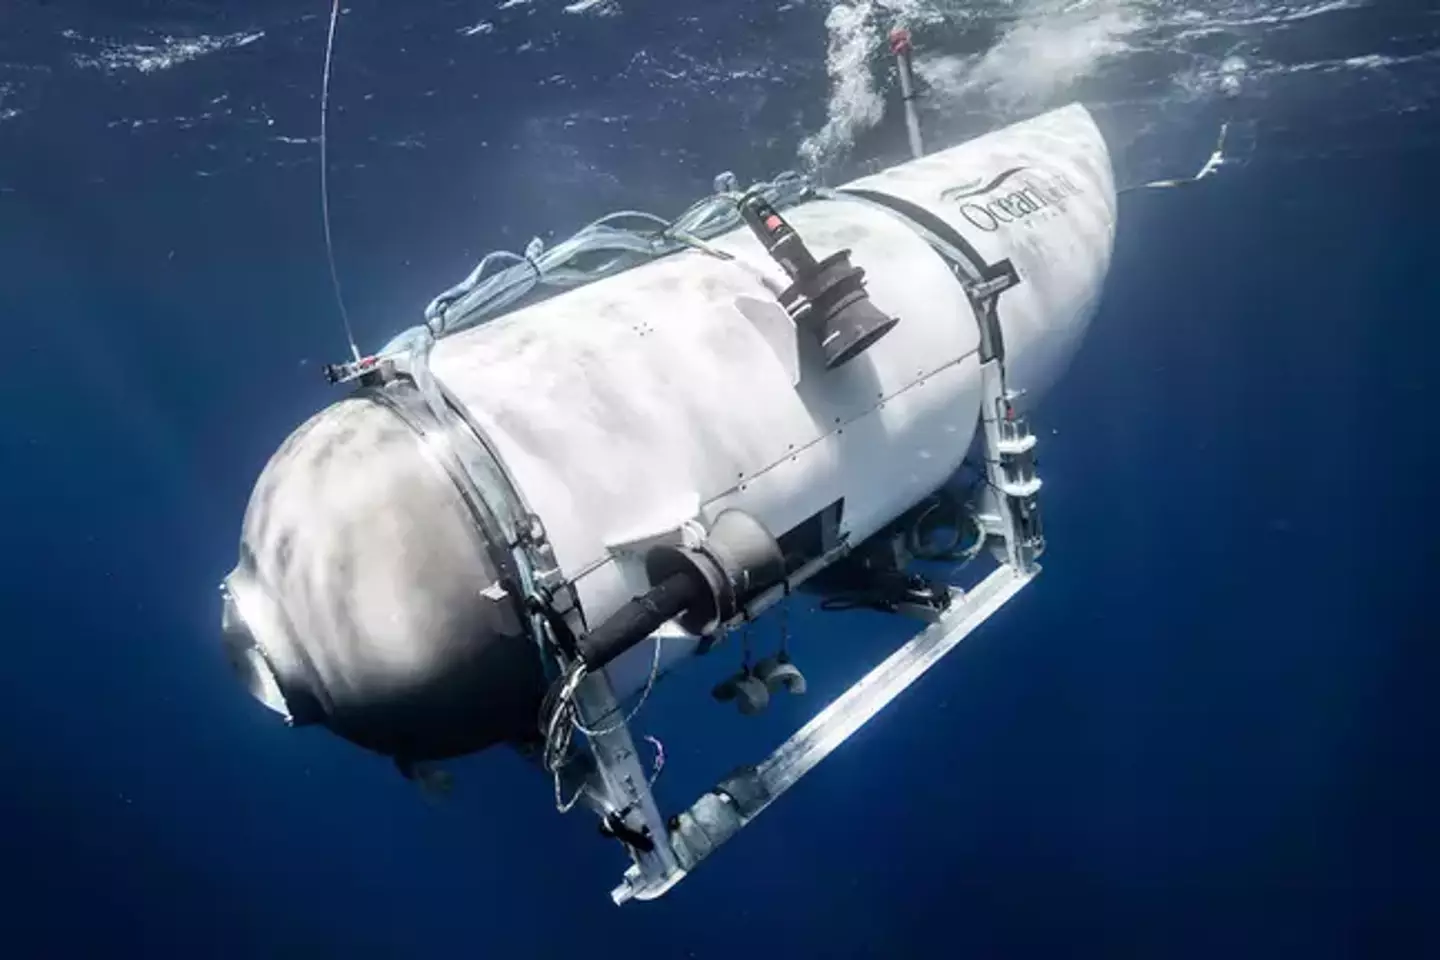 The Titan submersible is missing with five people on board.